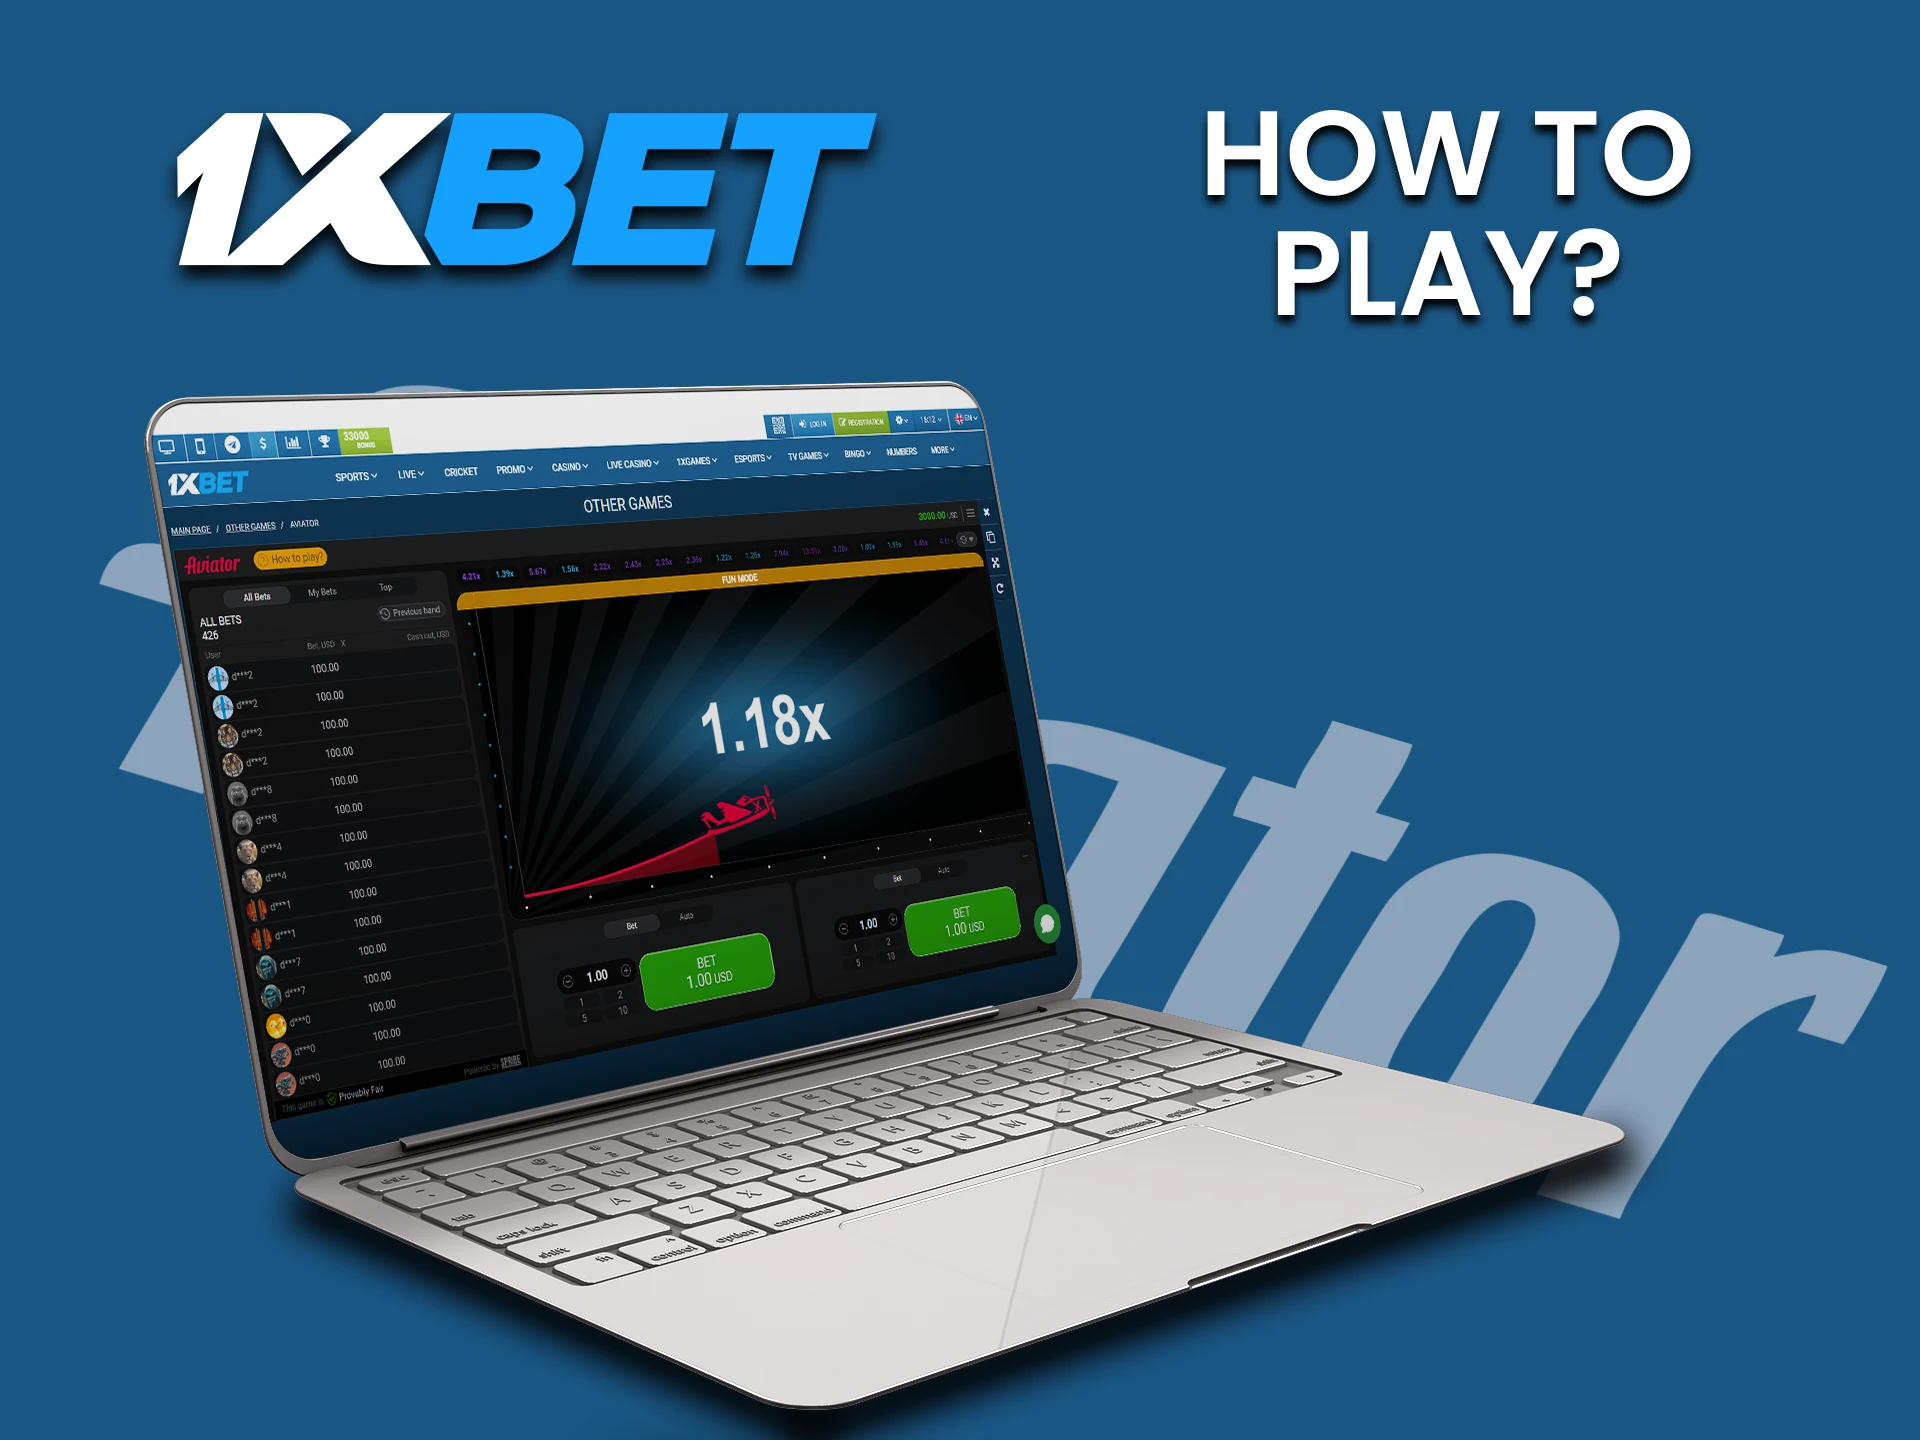 We will tell you how to play Aviator to win on 1xbet.